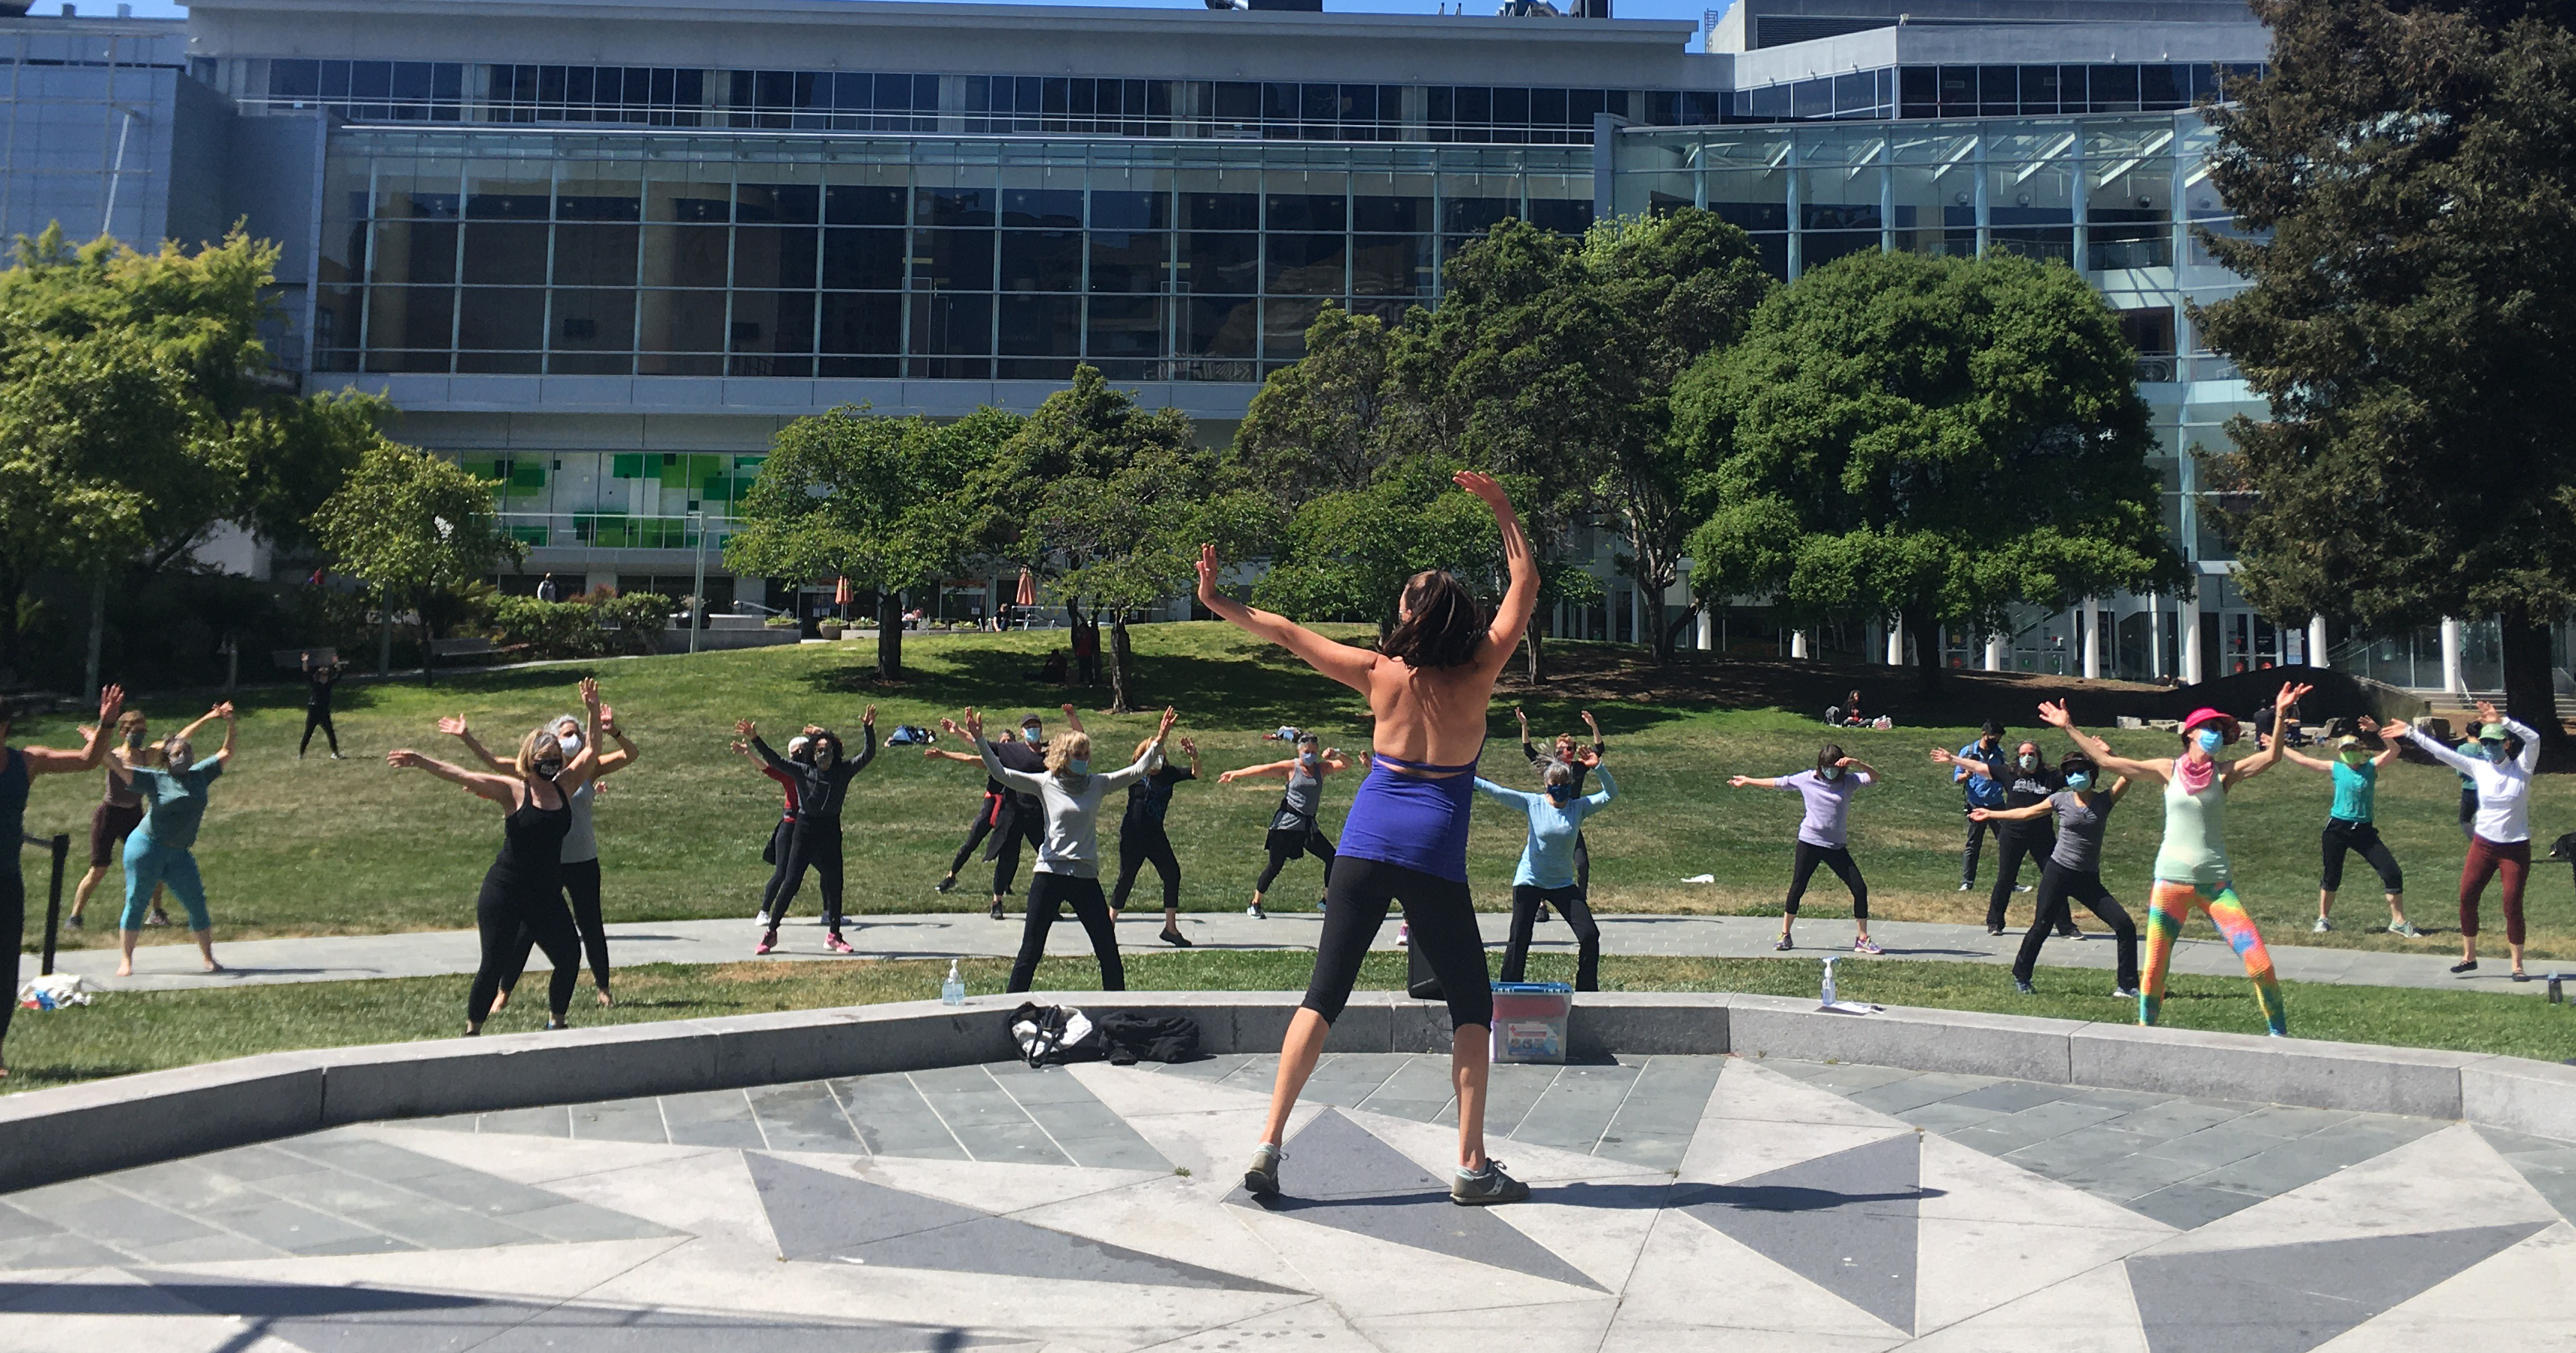 Back of a dance instructor on the Yerba Buena Gardens Festival Stone Stage, arms stretched upwards. Facing a group of dance class students standing on the grass lawn, also with their arms stretched out.